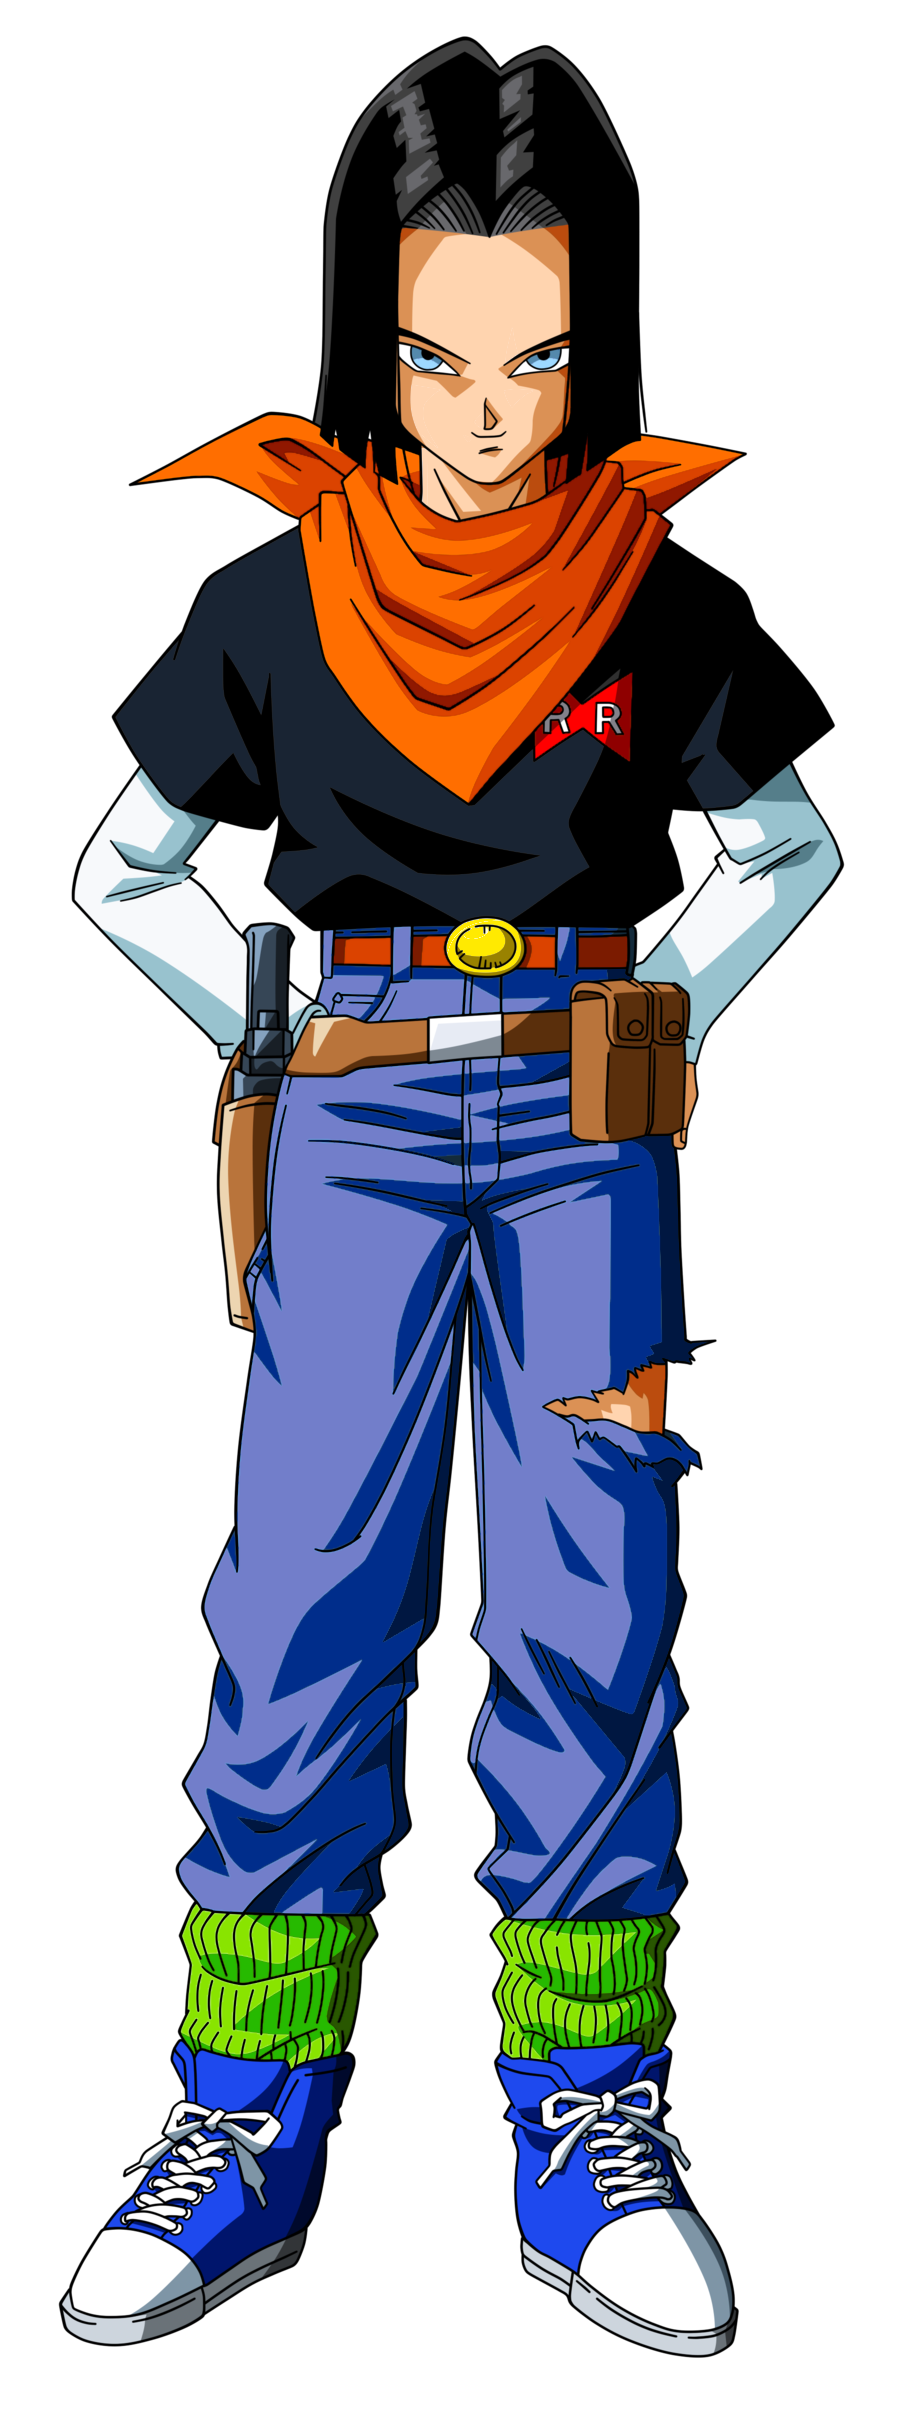 Image of Android 9 Dragon Ball Z: Super Android 16 - Ultra Dragon Ball Wiki